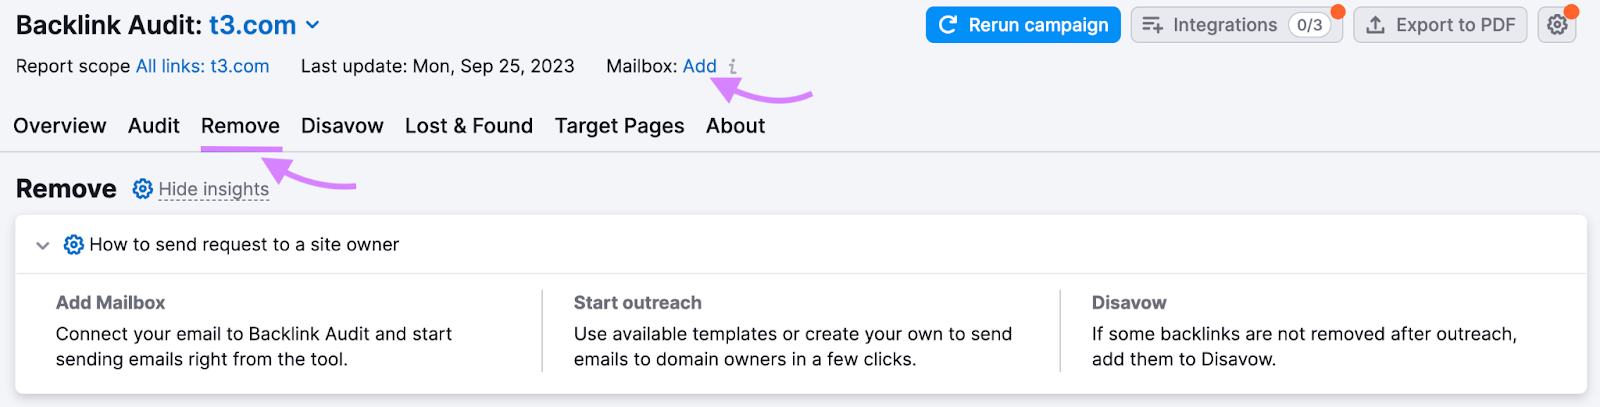 "Mailbox: Add" button selected under "Remove" tab in Backlink Audit tool